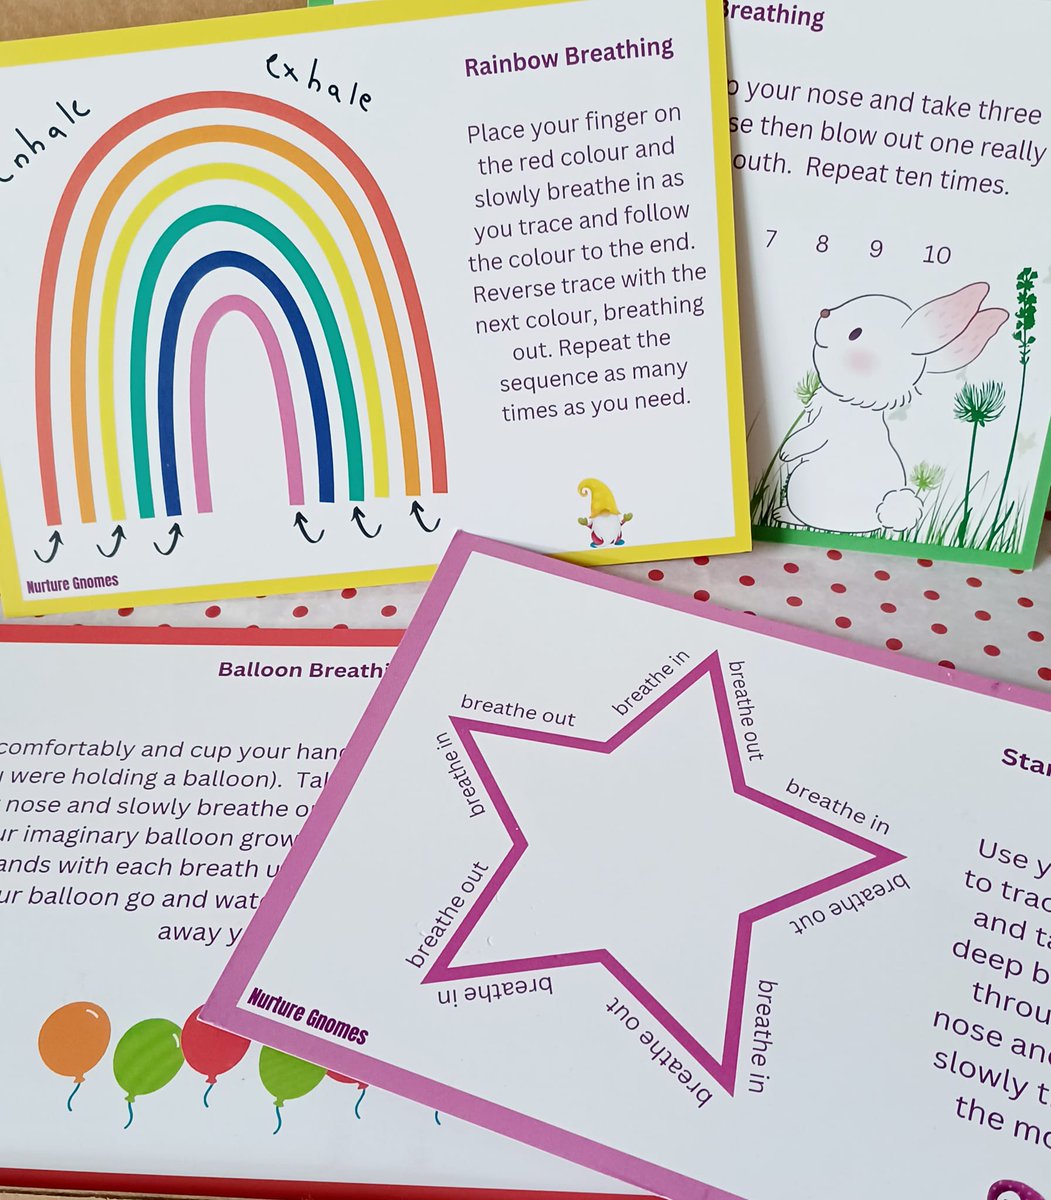 A set of 4 children's mindfulness cards to help with teaching self-regulation and ideal in schools too, after high energy activities 😃 
£2.50 (plus p&p)
nurturegnomes.co.uk/product/set-of…

#calmbreathing #relaxing #Mindfulness #childrenswellbeing #schools #playtherapy